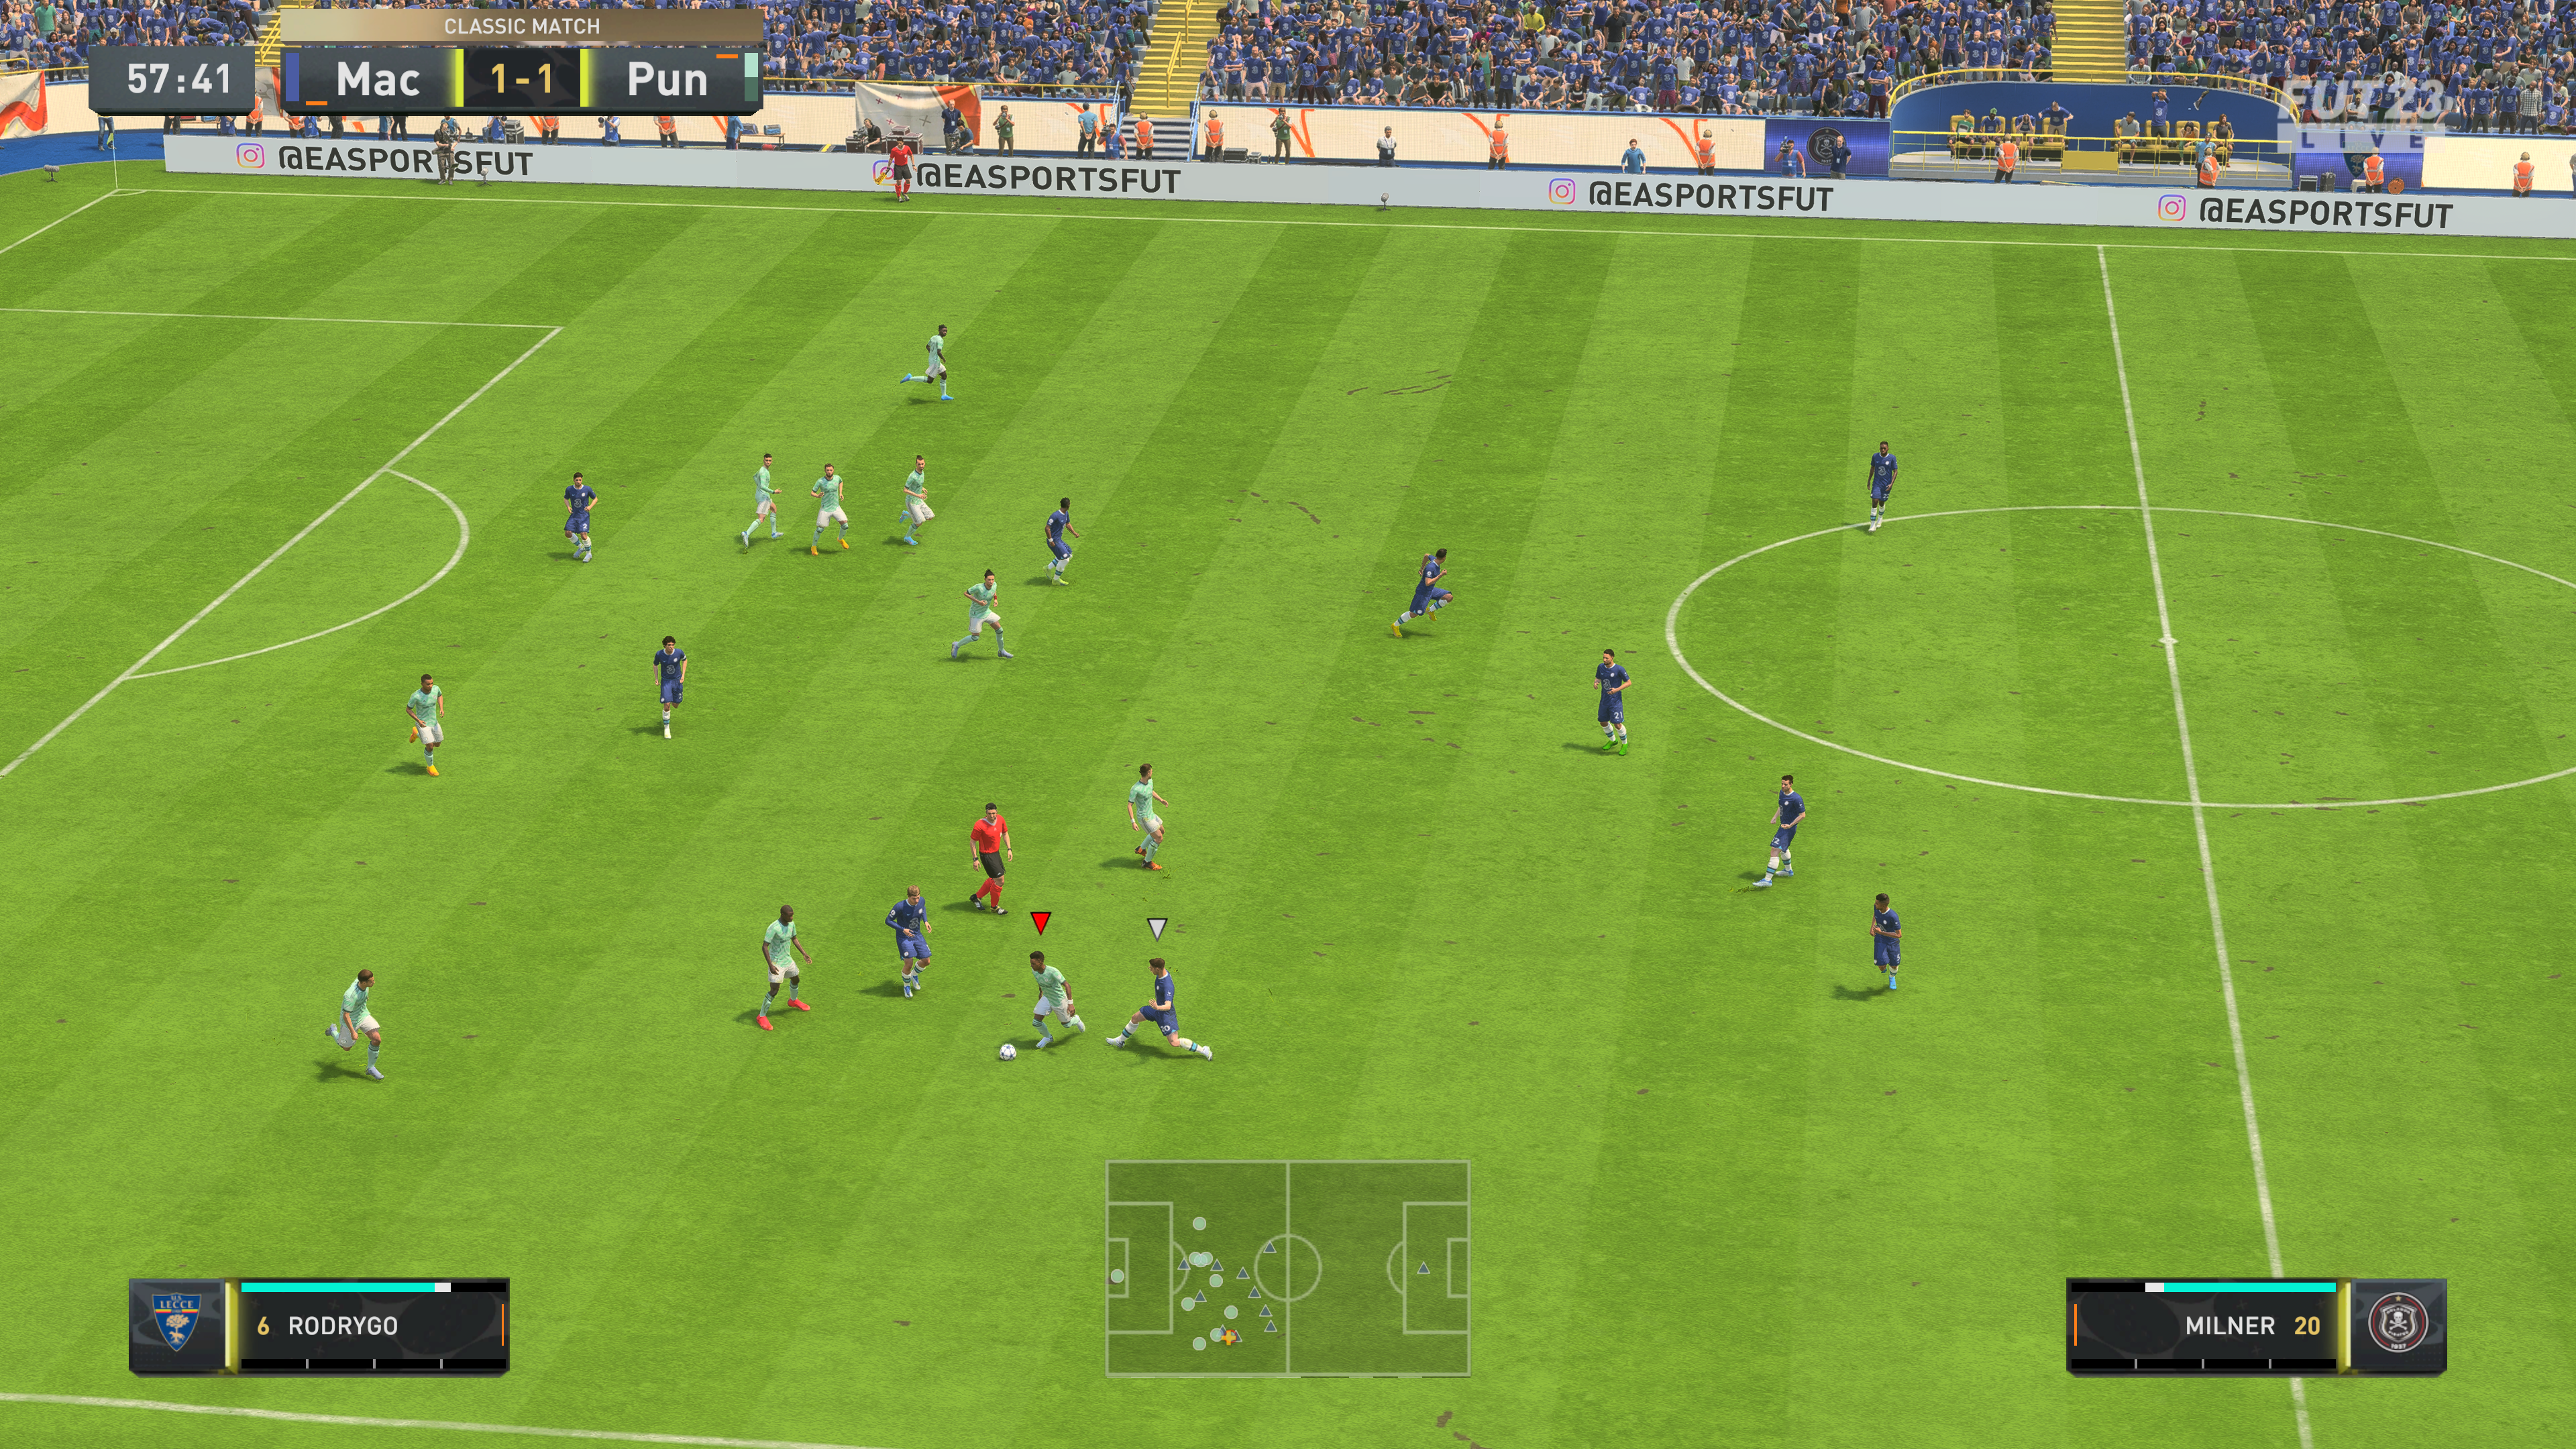 FIFA 23 review - some friendly gameplay between friends